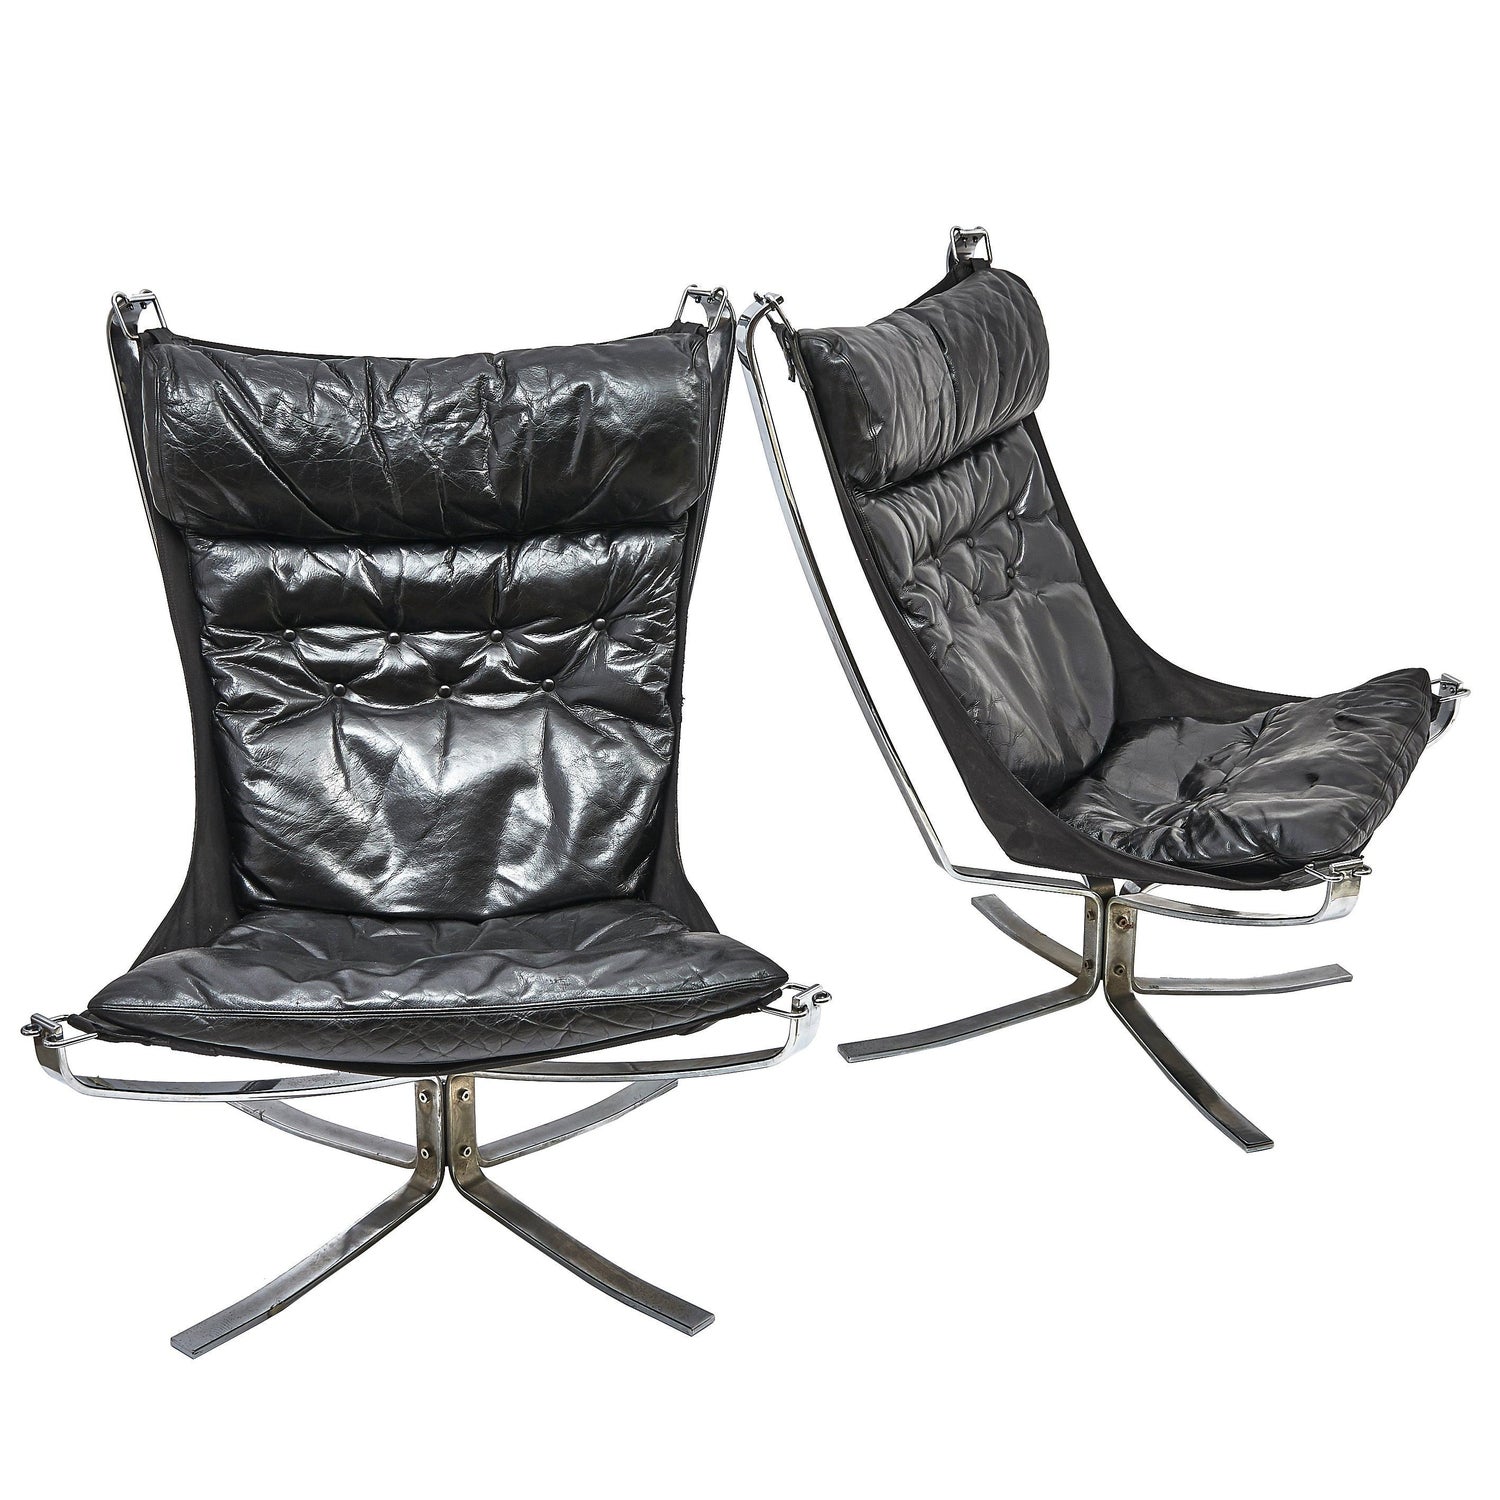 Sigurd Ressell Armchairs - 1 For Sale at 1stDibs